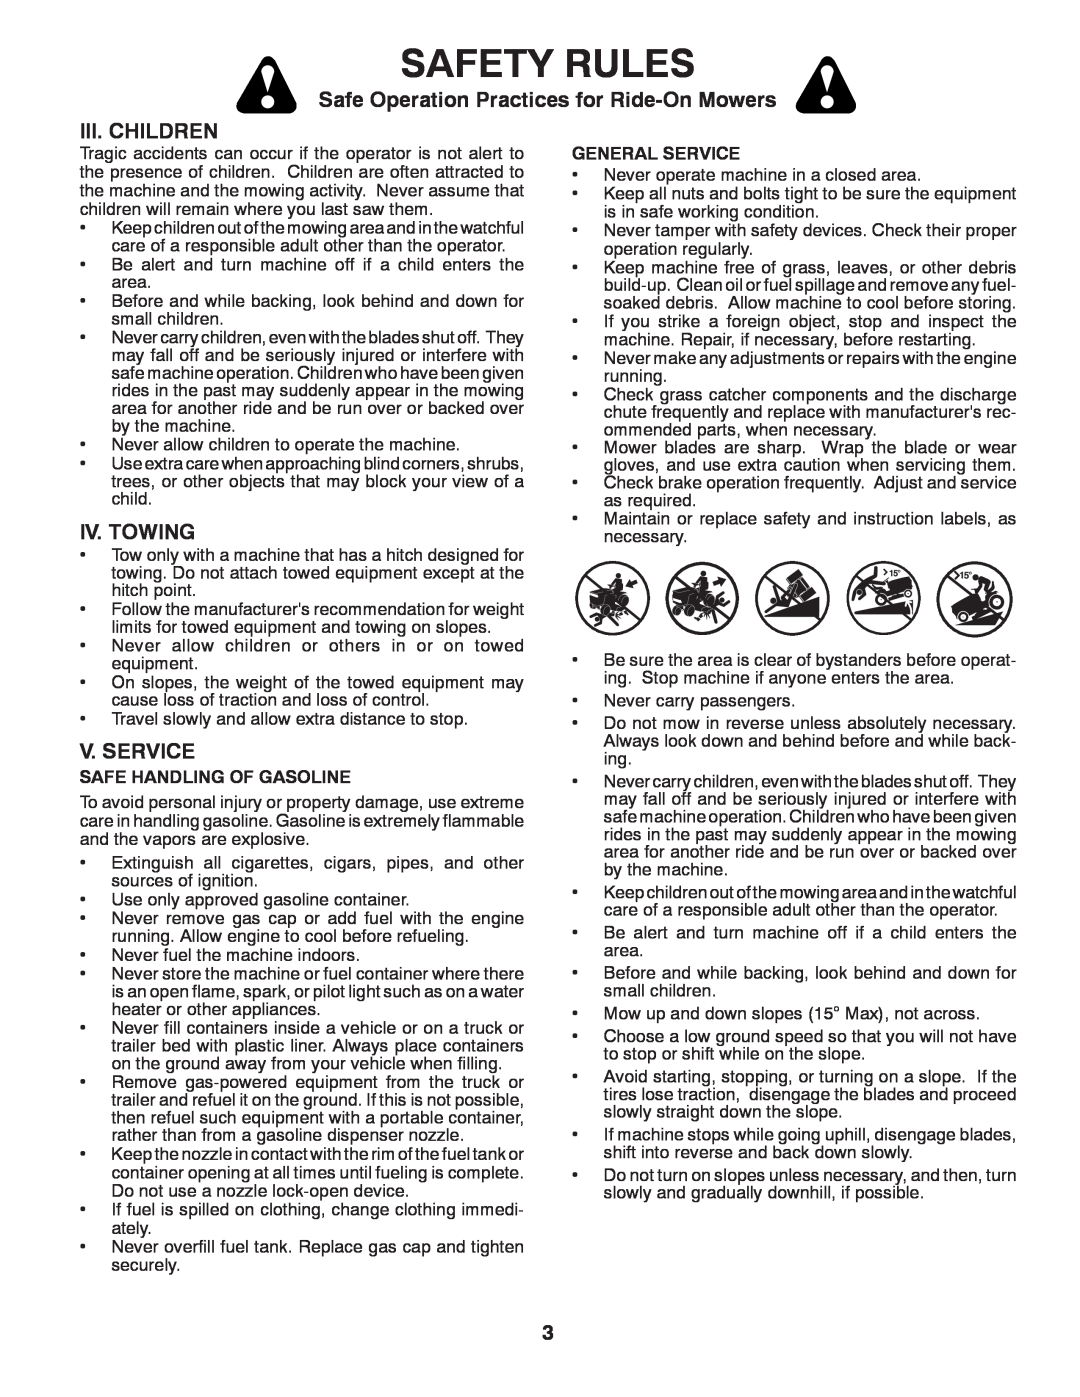 Poulan 96042010900 manual Iii. Children, Iv. Towing, V. Service, Safety Rules, Safe Operation Practices for Ride-On Mowers 